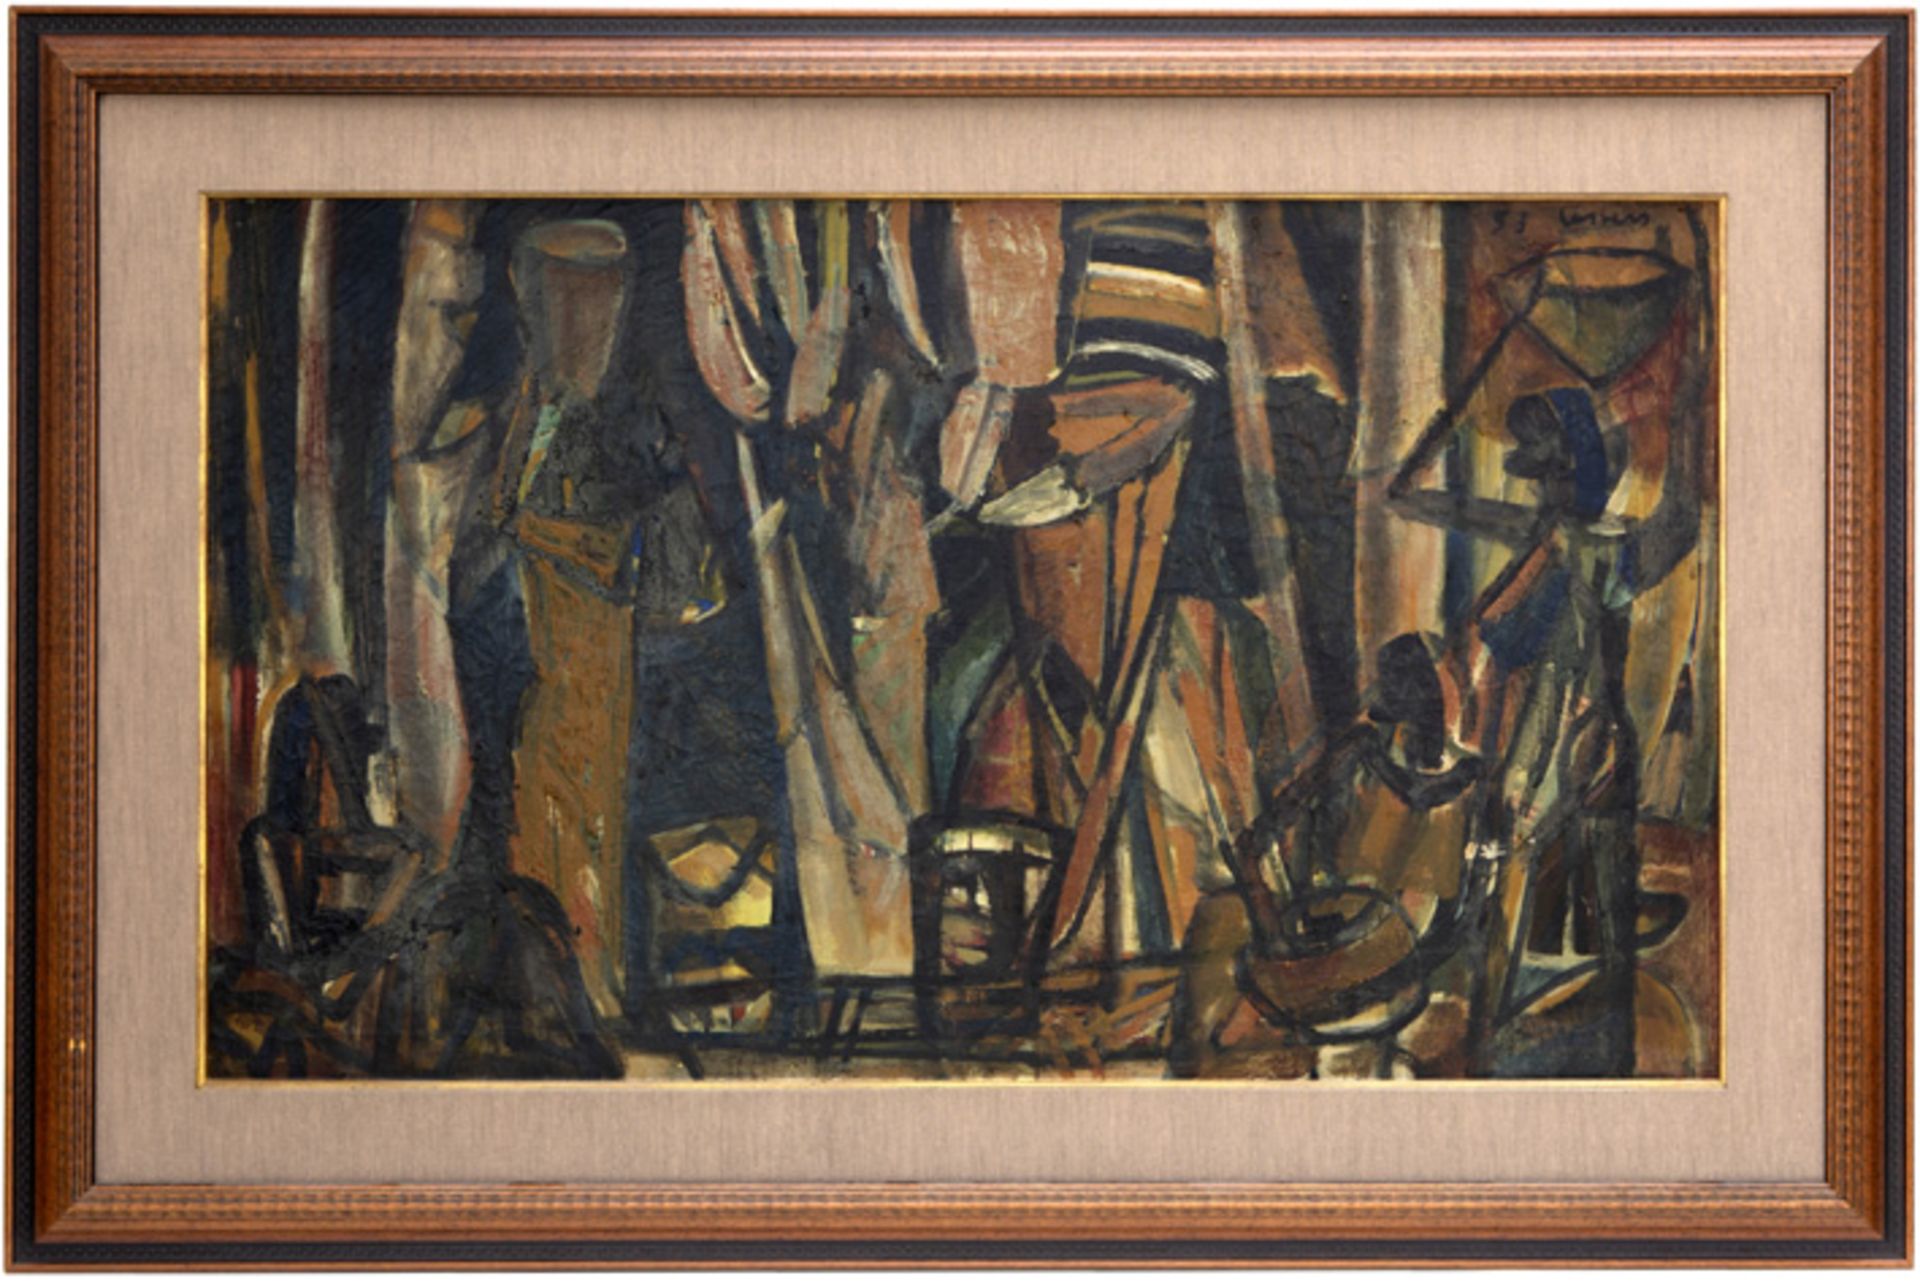 mid 20th Cent. Belgian typical Floris Jespers "African period" oil on canvas - signed and dated 1953 - Image 3 of 4